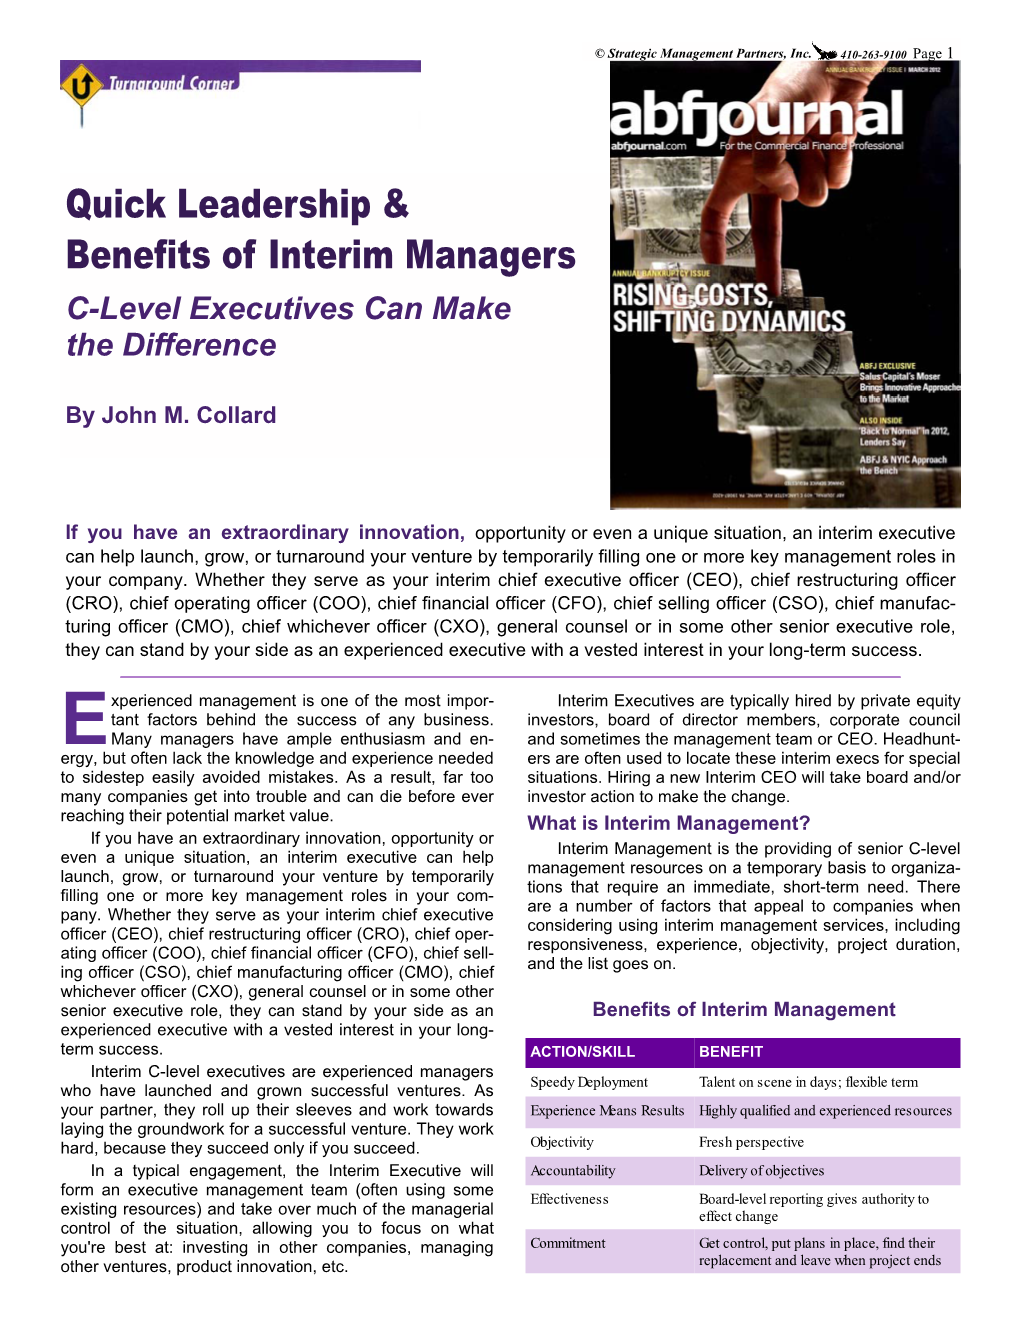 Quick Leadership & Benefits of Interim Managers C-Level Executives Can